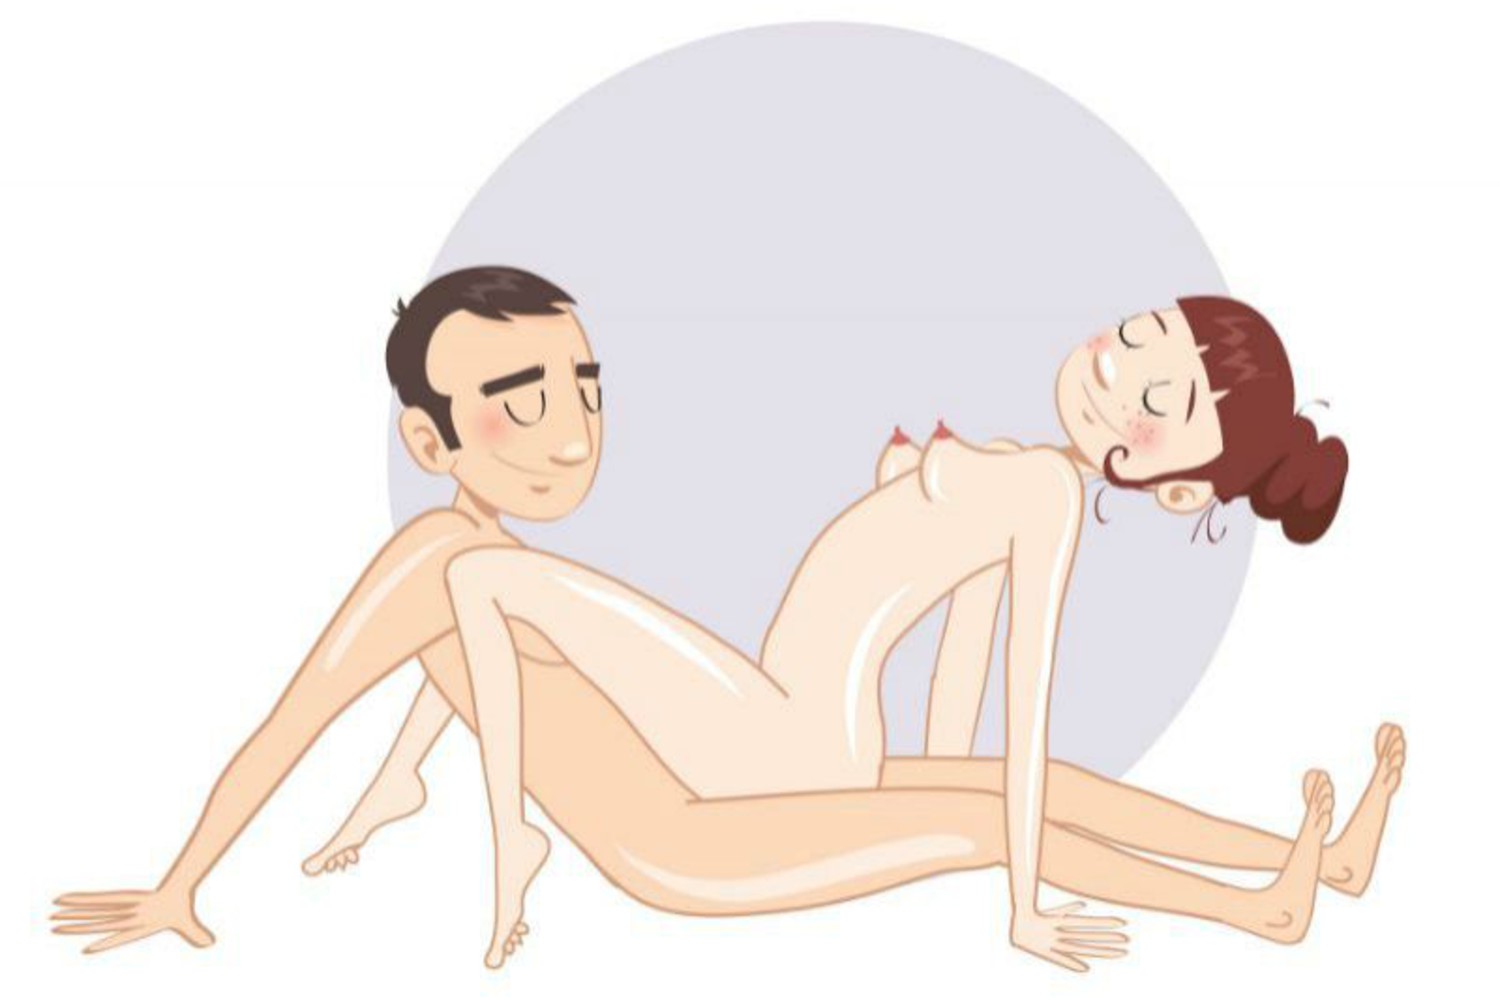 The Spider Sex Position